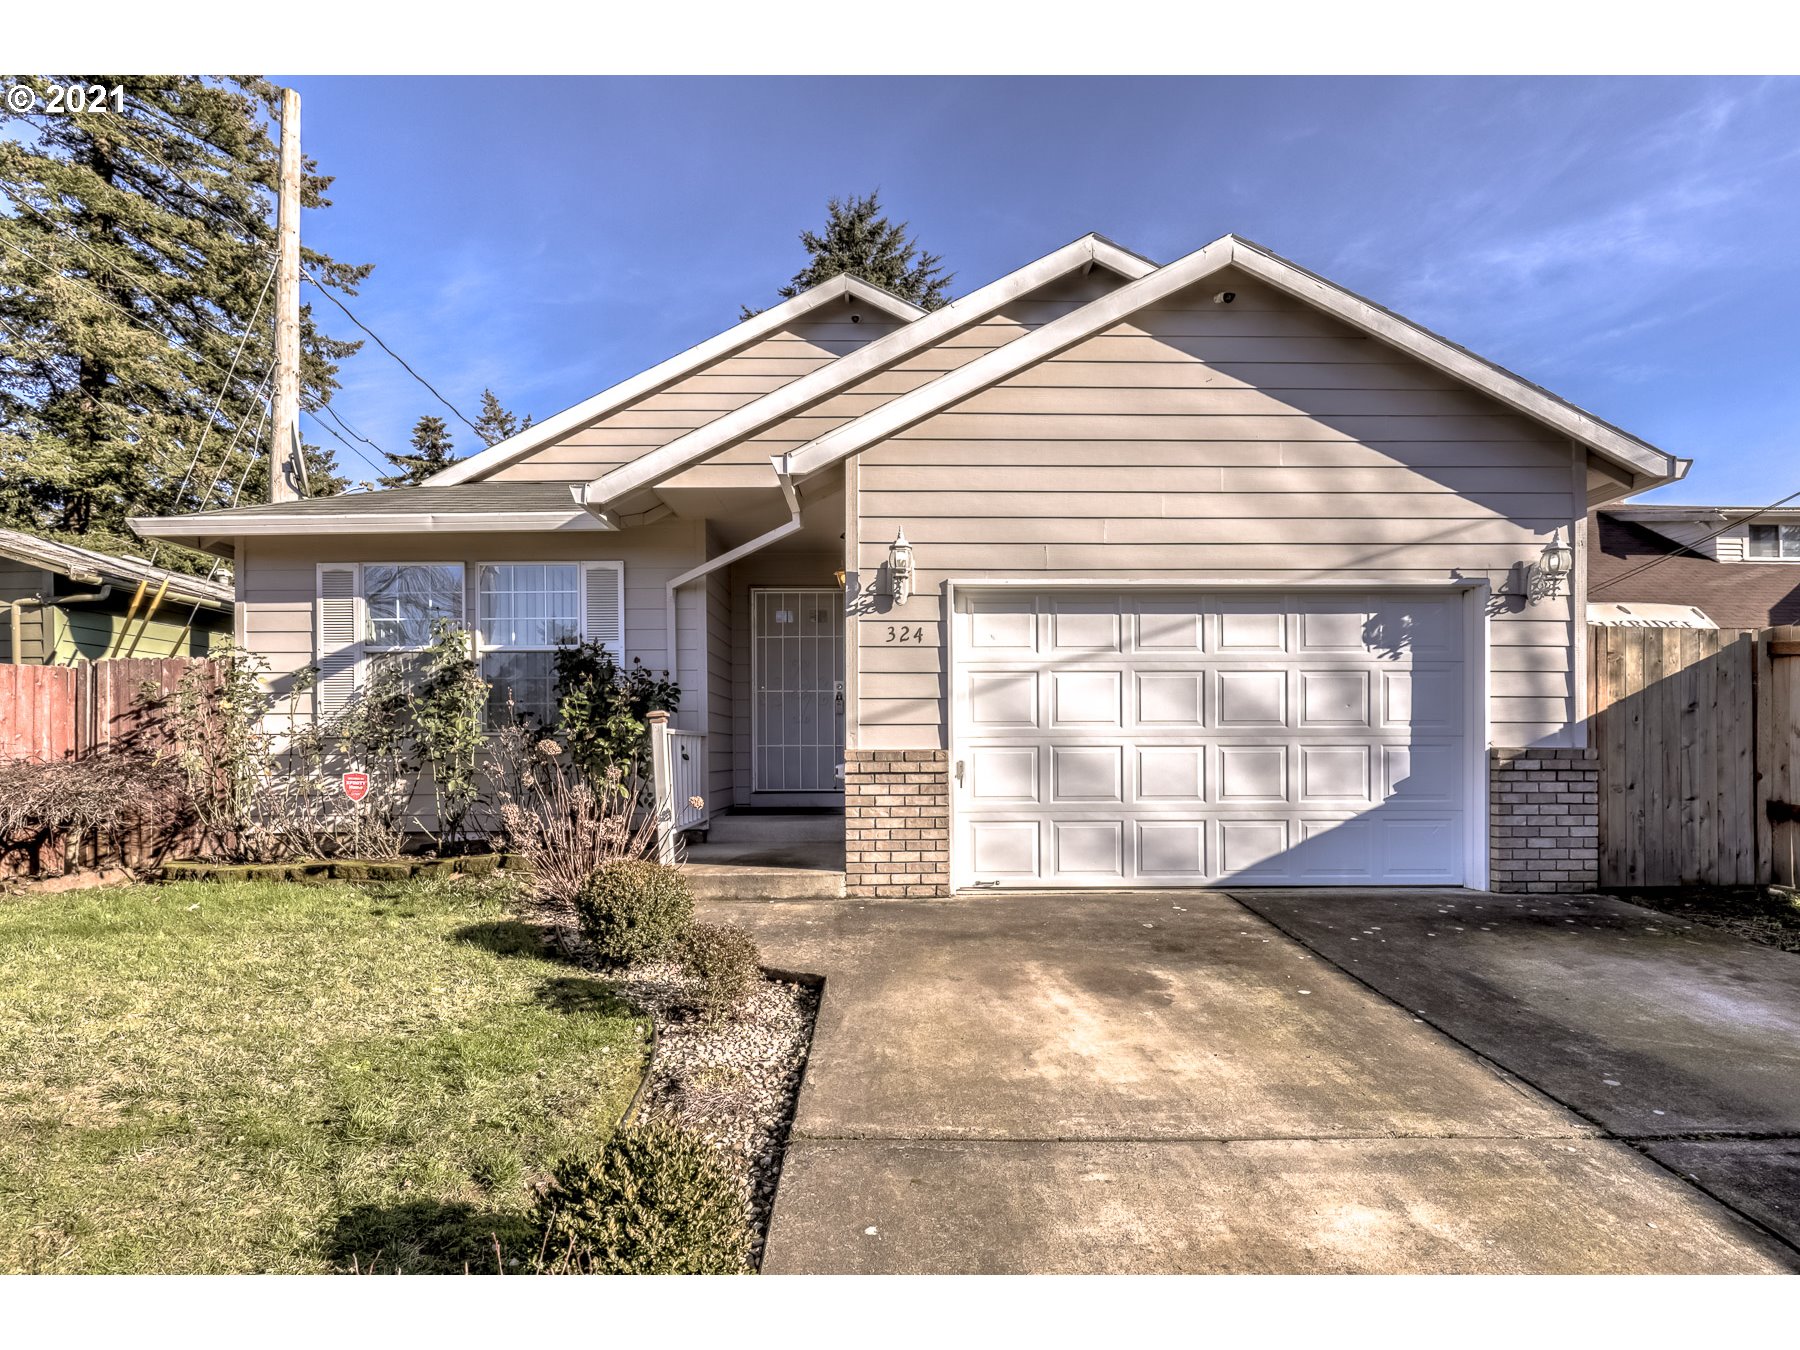 324 SE 139TH AVE (1 of 22)